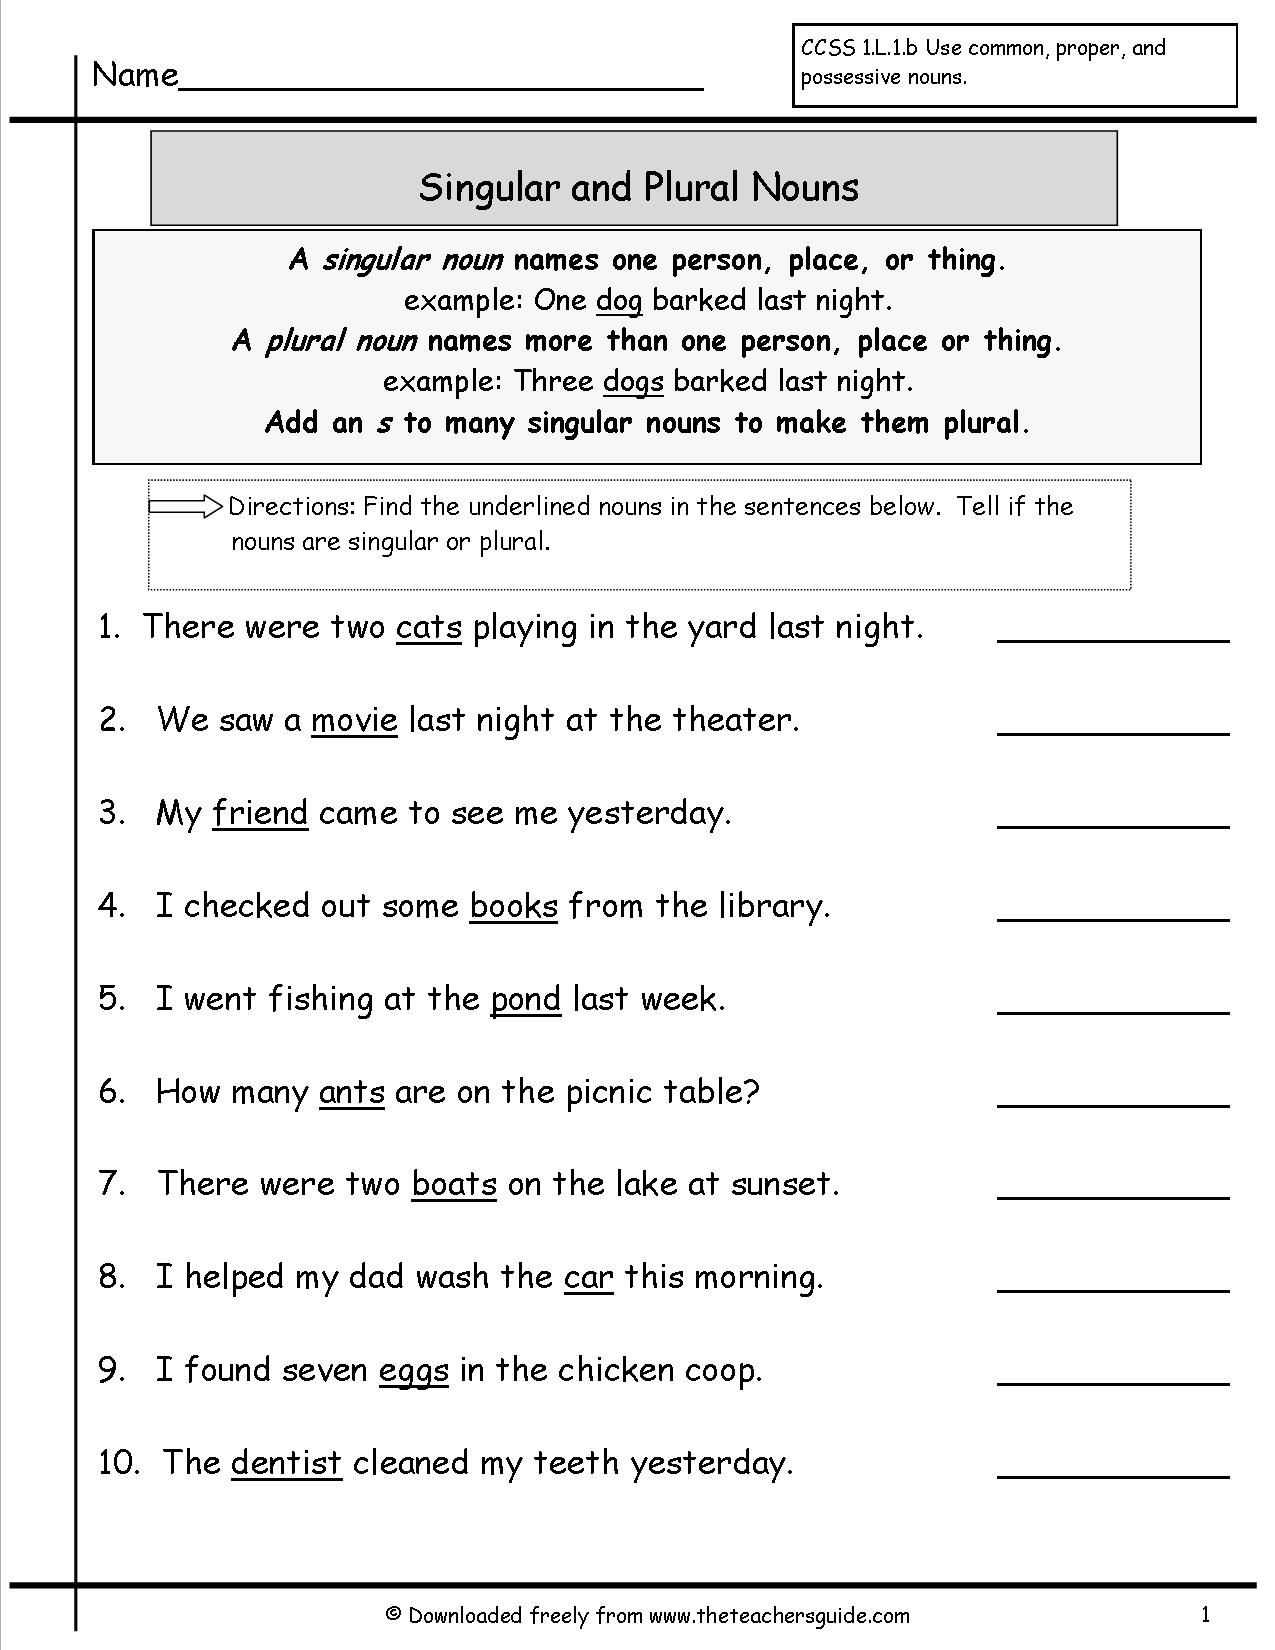 The Gender Of Nouns Spanish Worksheet Answers Along with Worksheets On Singular and Plural Nouns Use as A Go to Resource for